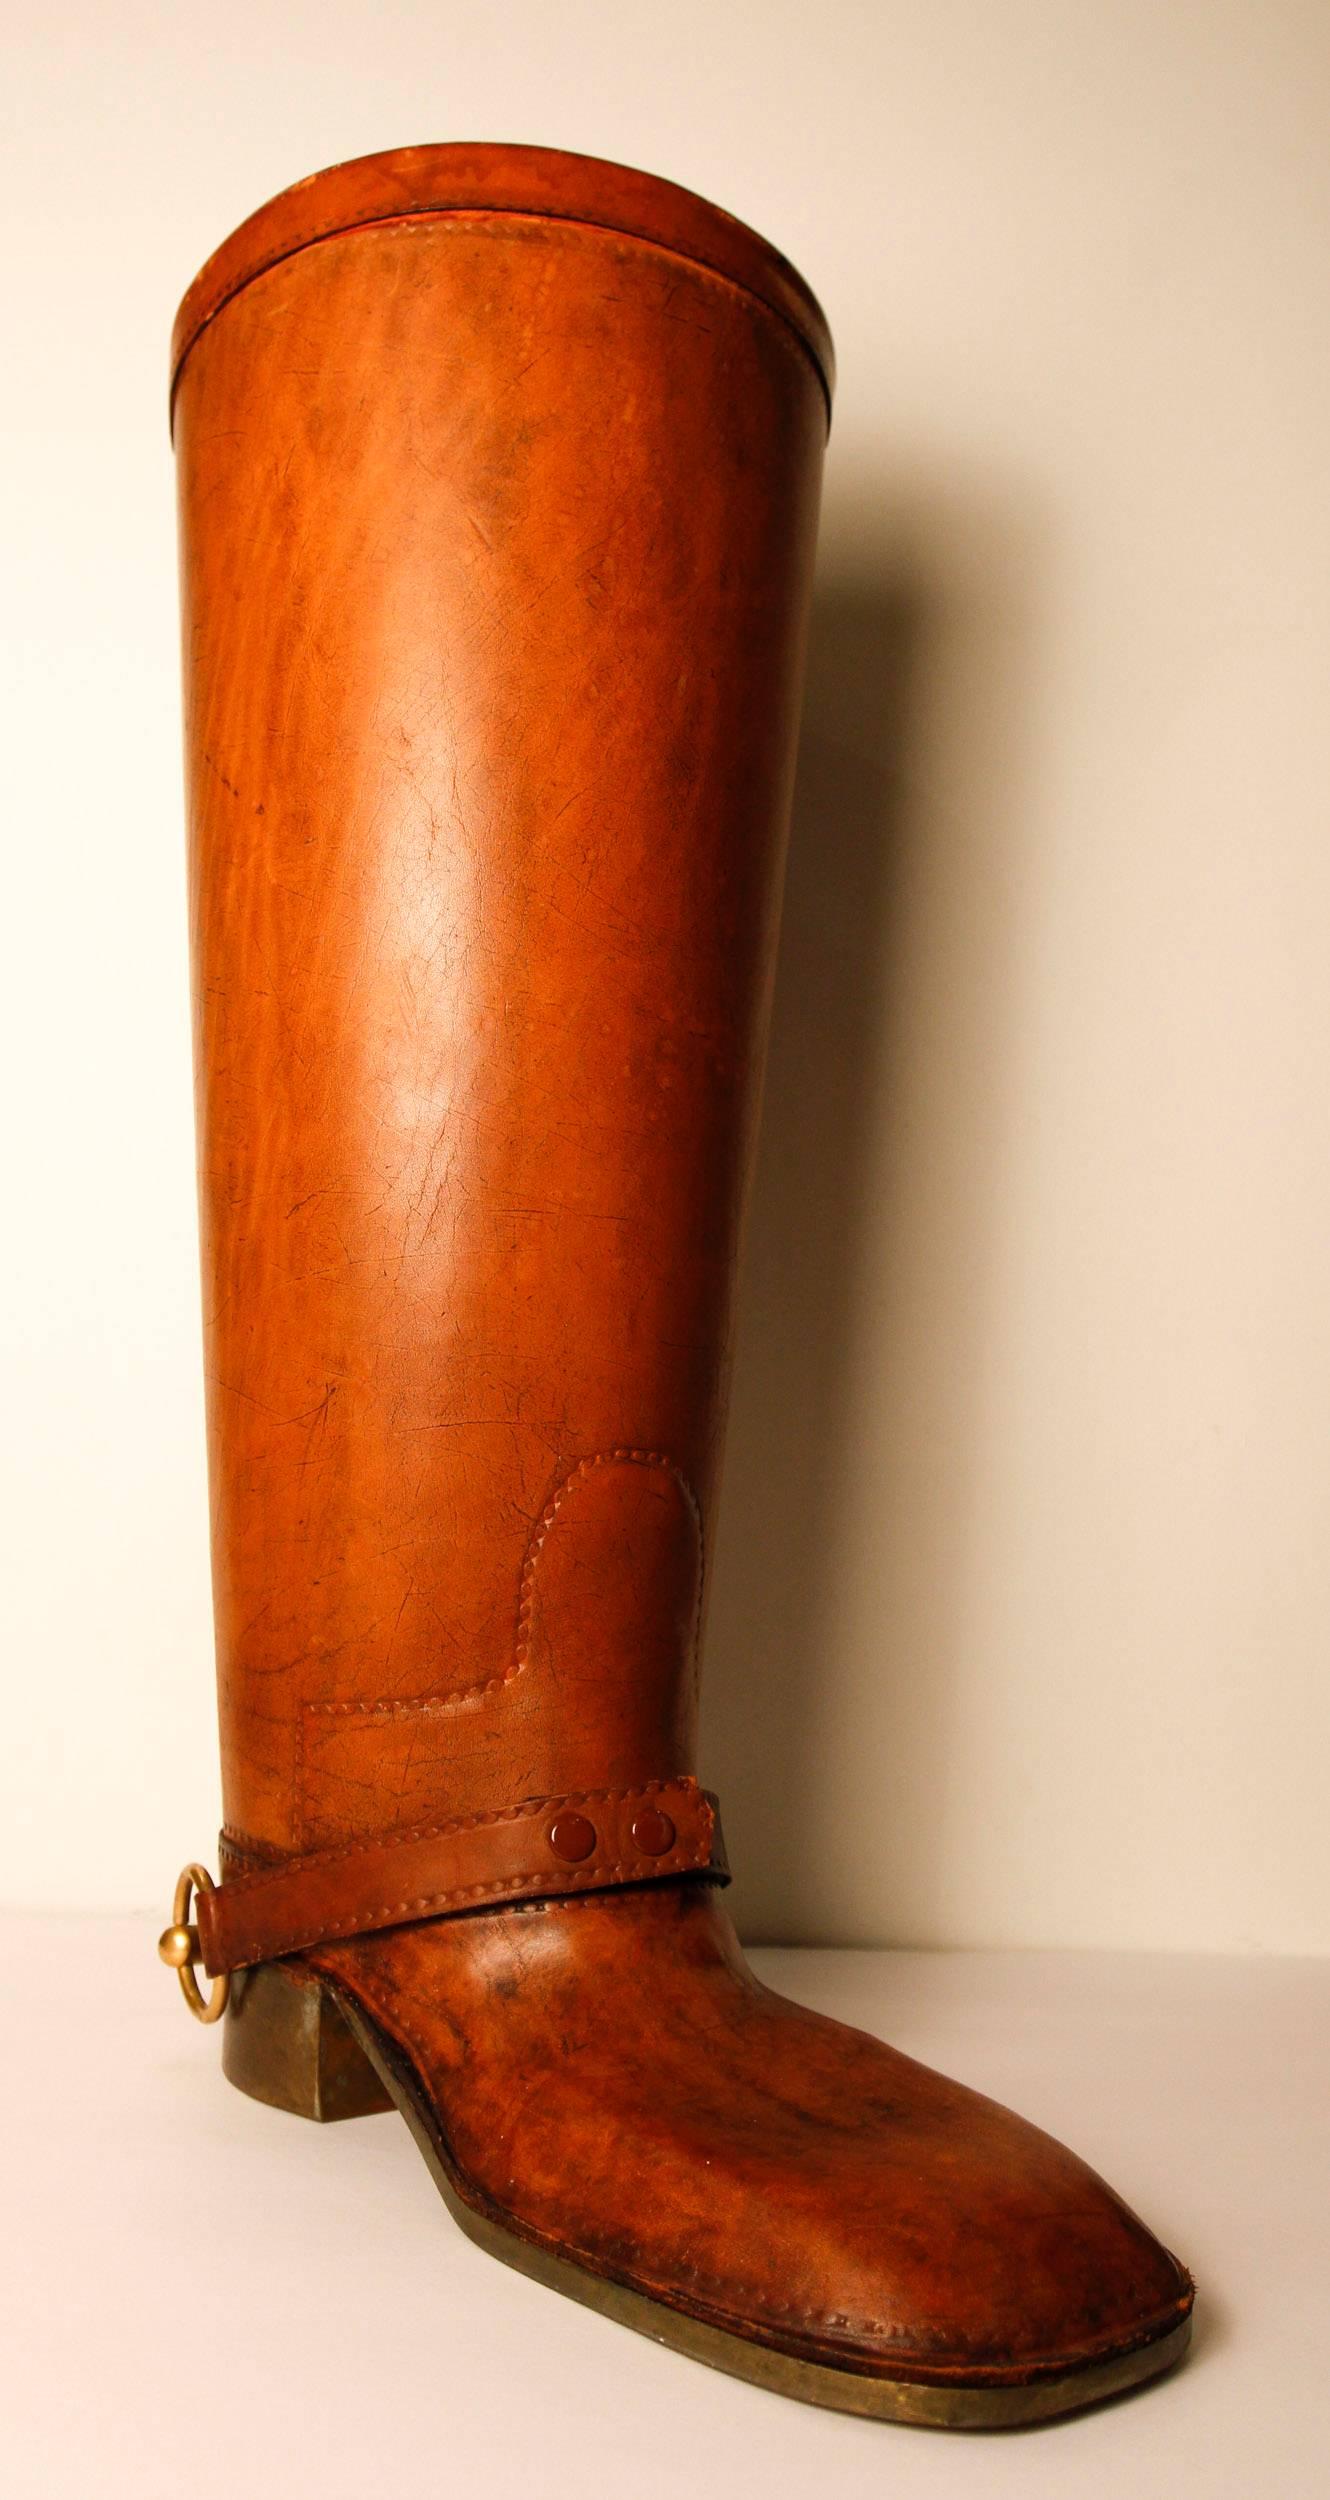 Large equestrian boot may be used as cane holder or umbrella stand. It is in the style of Gucci.